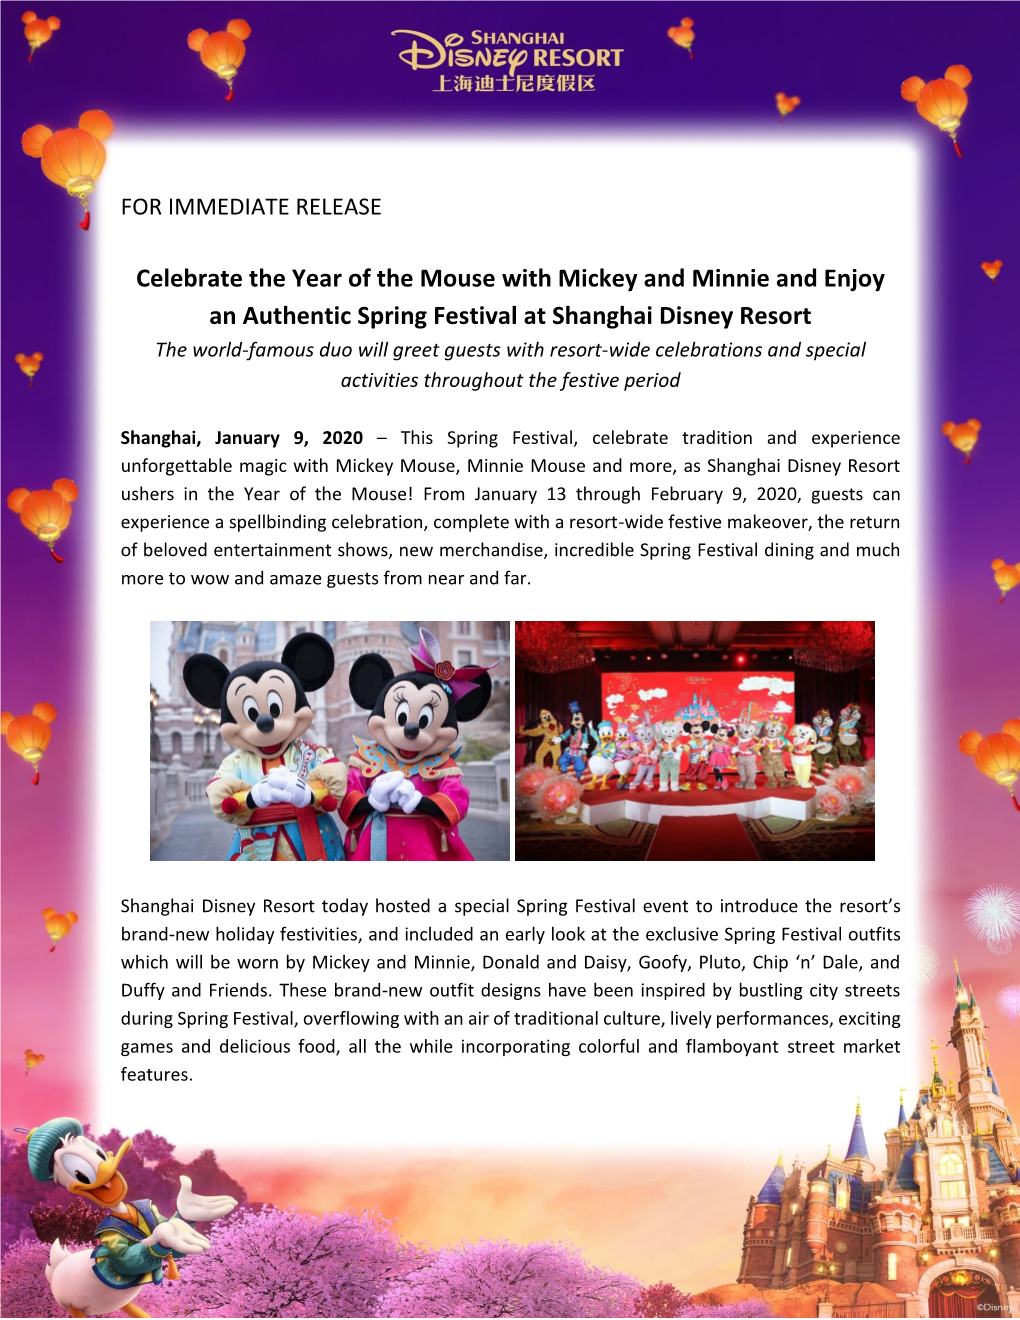 Celebrate the Year of the Mouse with Mickey and Minnie and Enjoy An